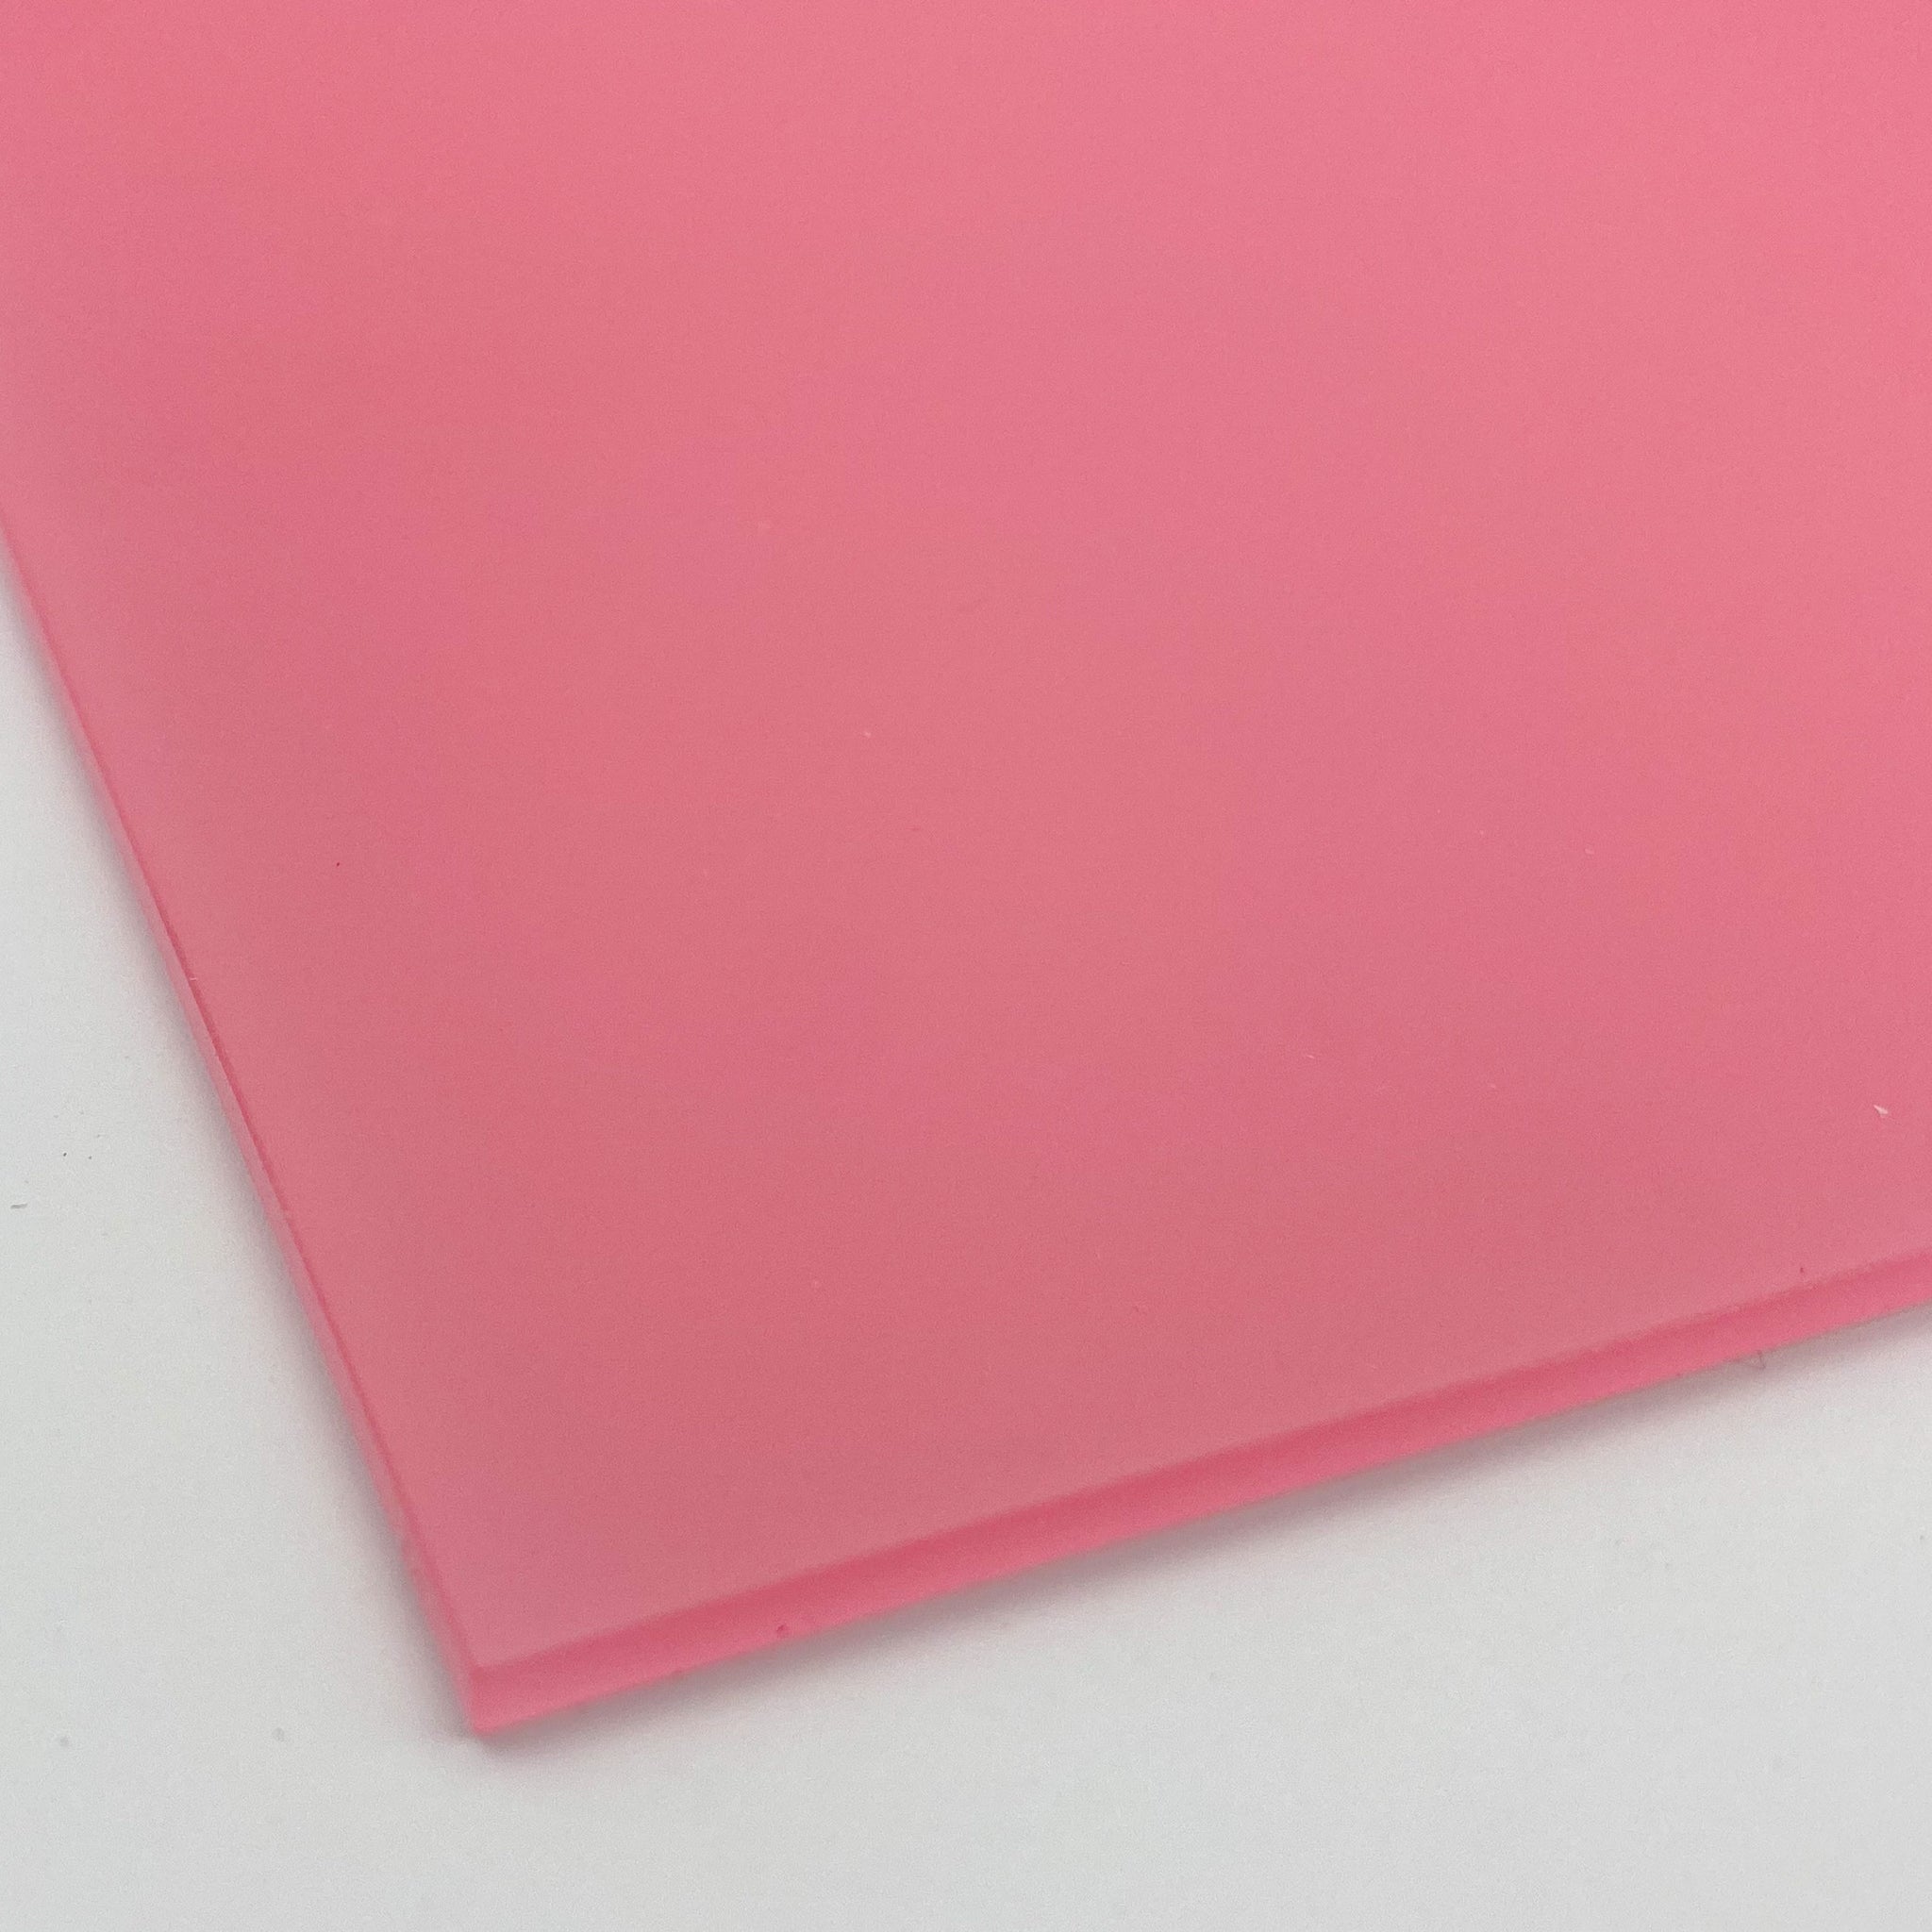 Blush Pink 4T46 Frost Perspex Acrylic Sheet 45% Light Transmission